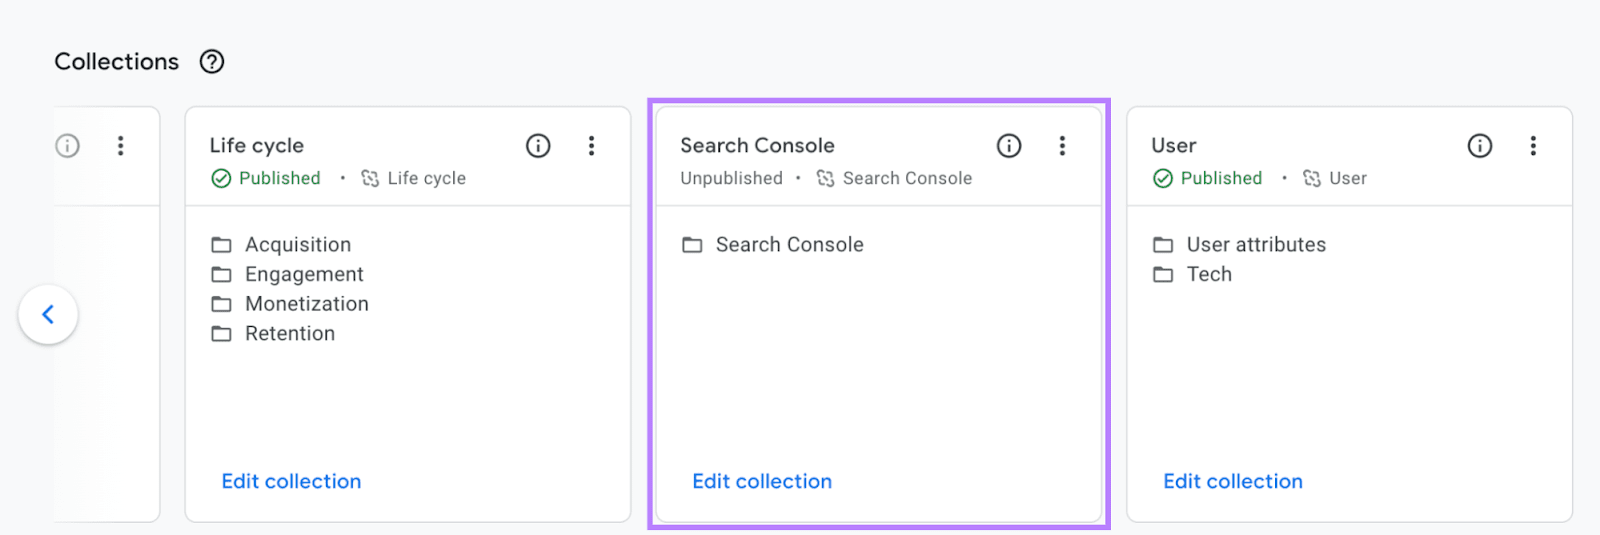 “Search Console” box selected from the “Collections” section